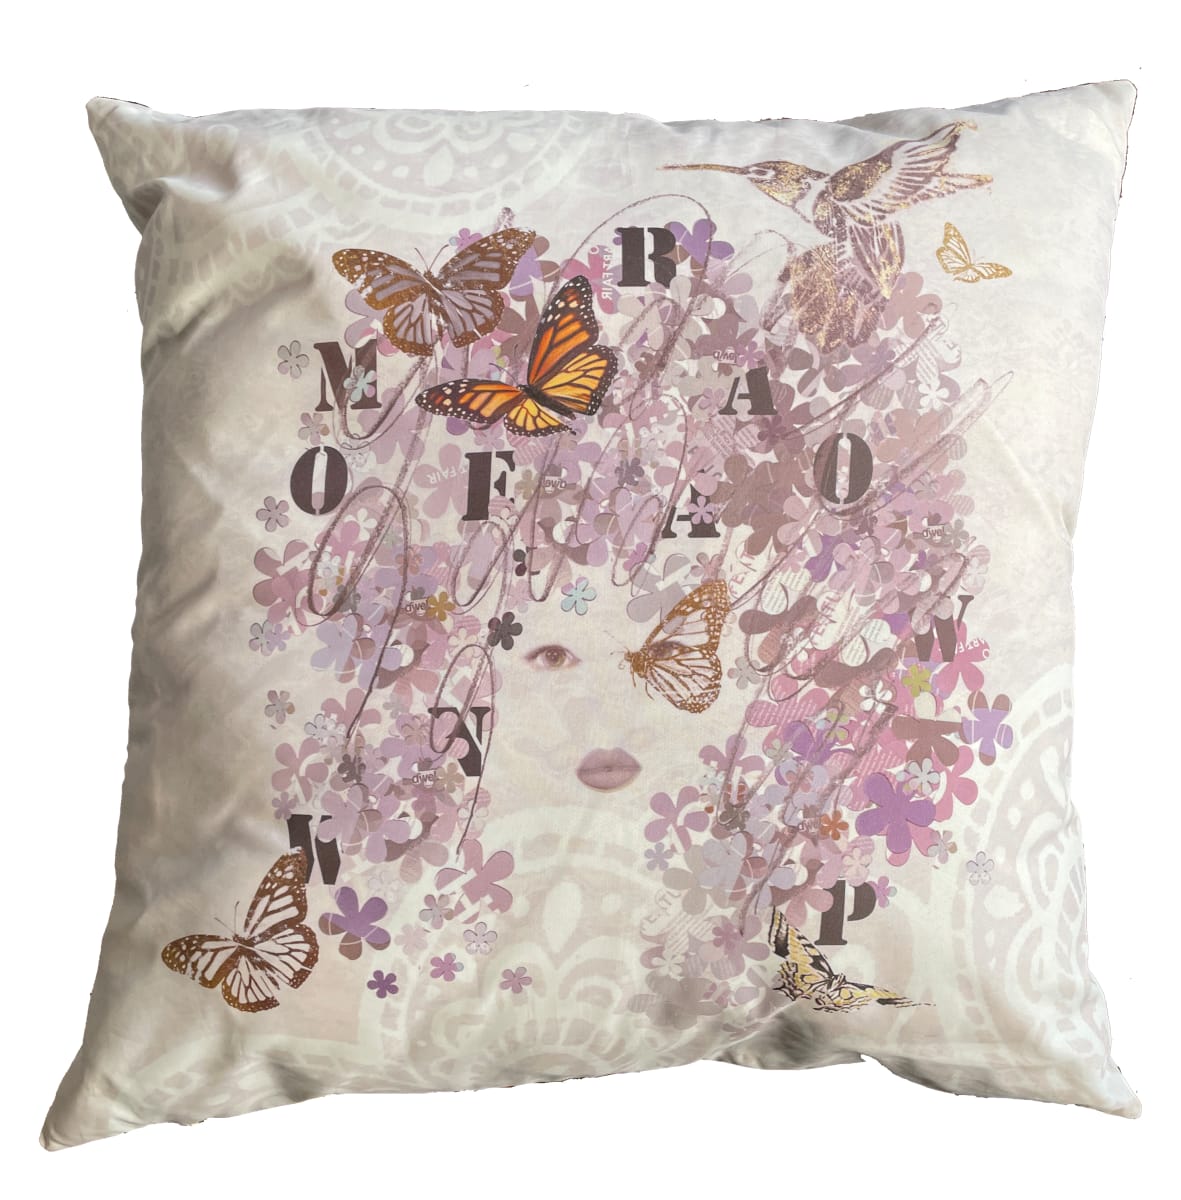 Pillows by Tina Psoinos  Image: Pillow Female_18x18  Small